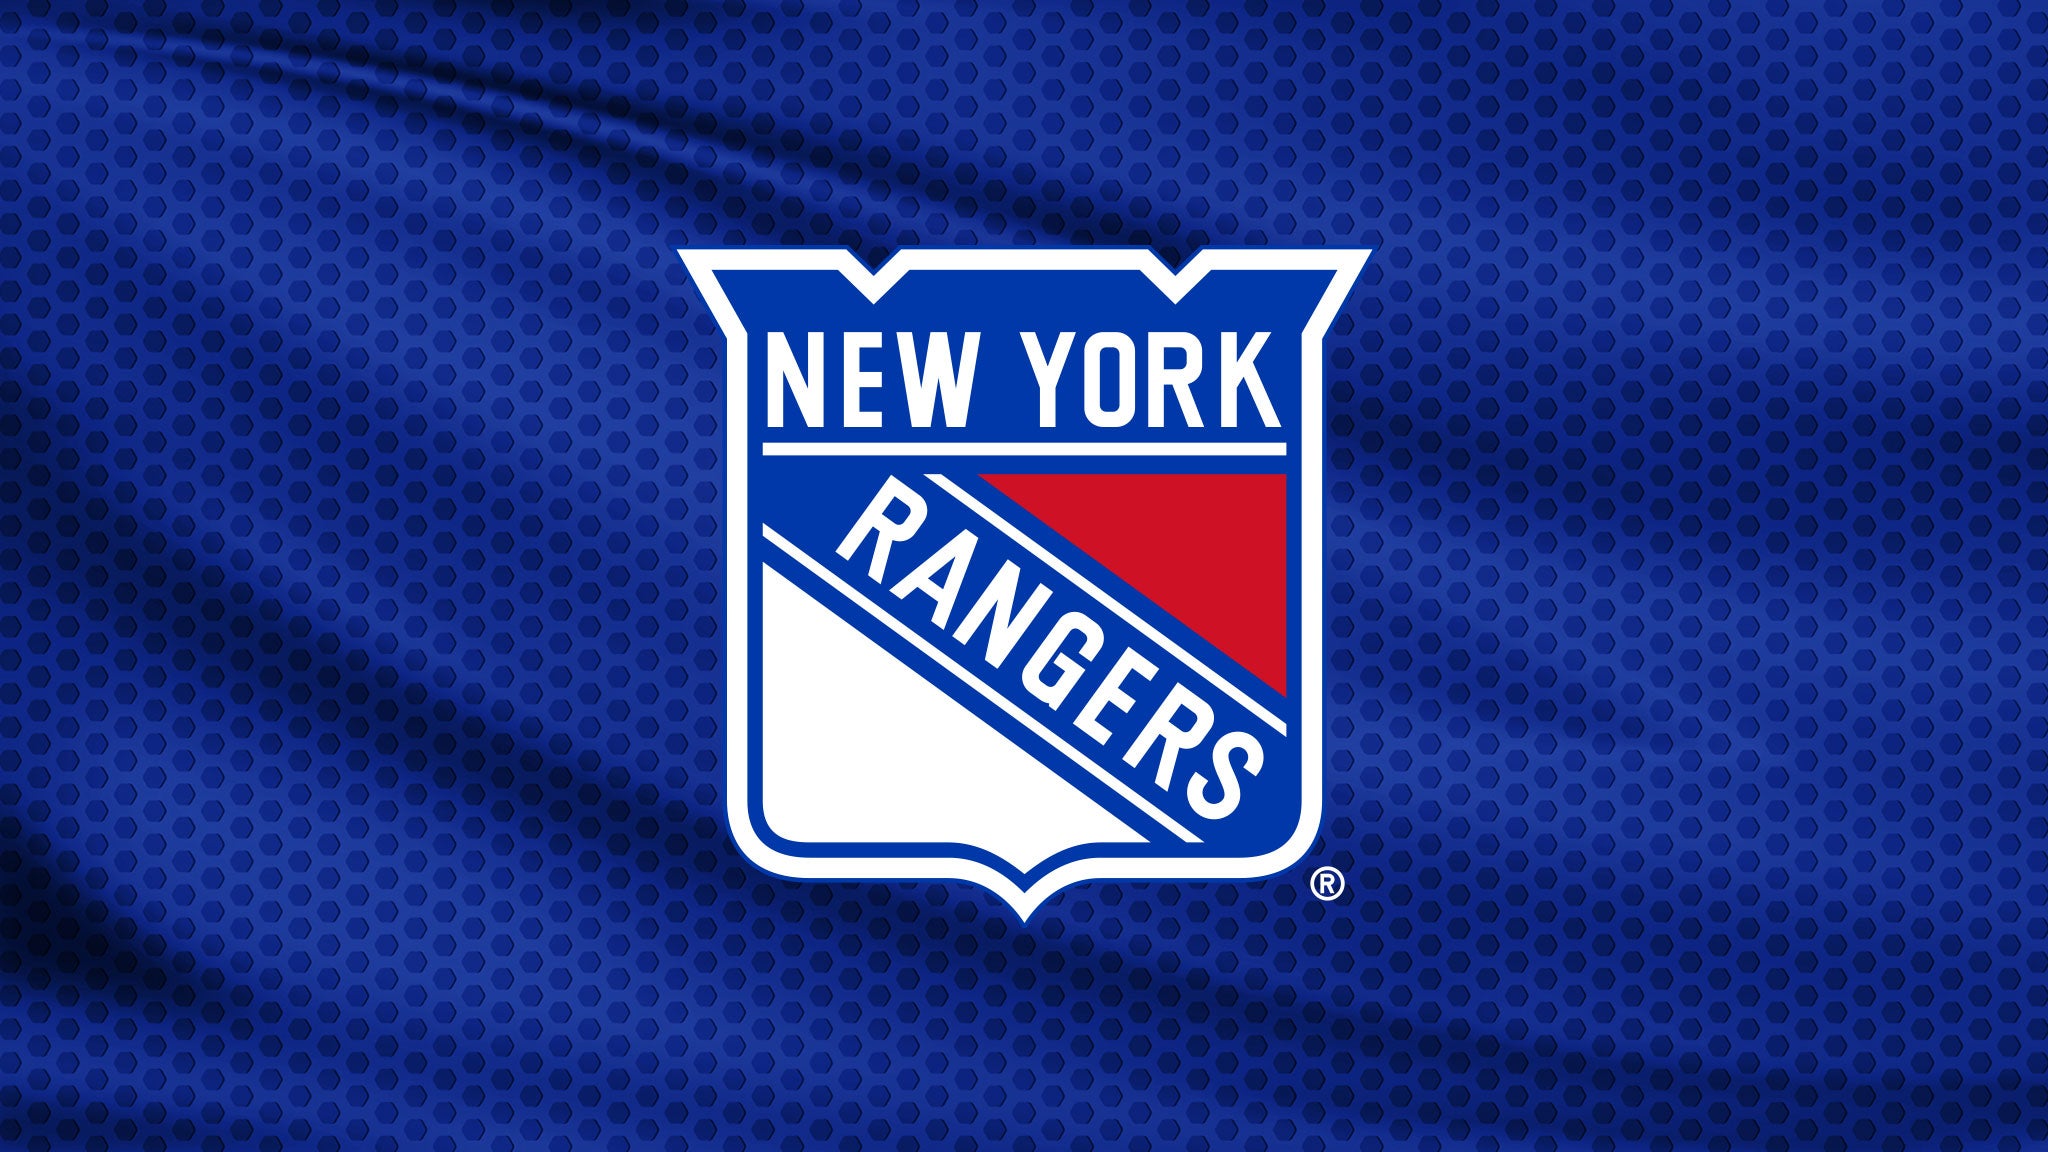 Second Round: Hurricanes at Rangers Rd 2 Hm Gm 3 in New York promo photo for MSG Fan-First presale offer code